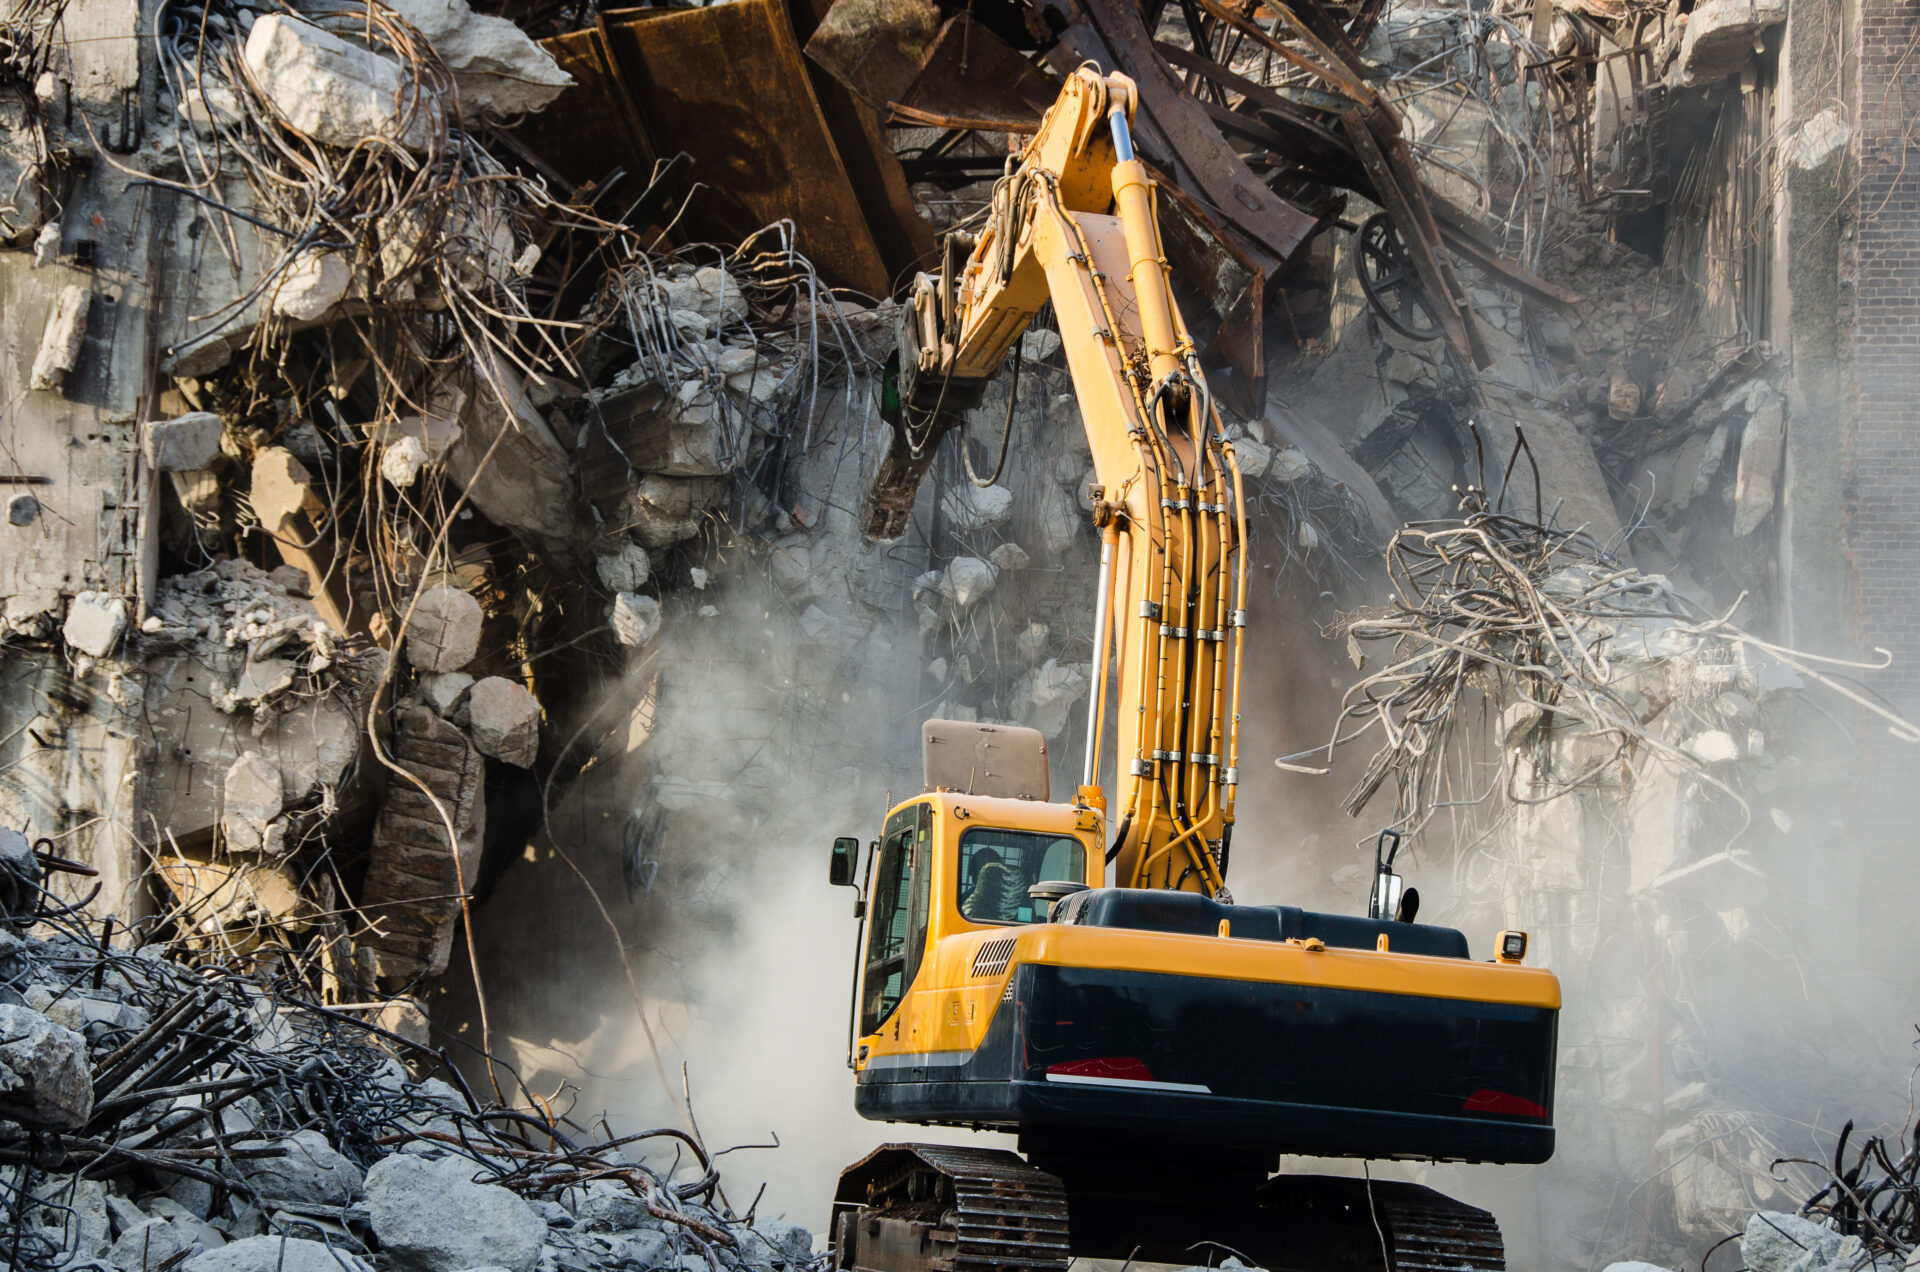 Excavator working at the demolition of an old industrial building